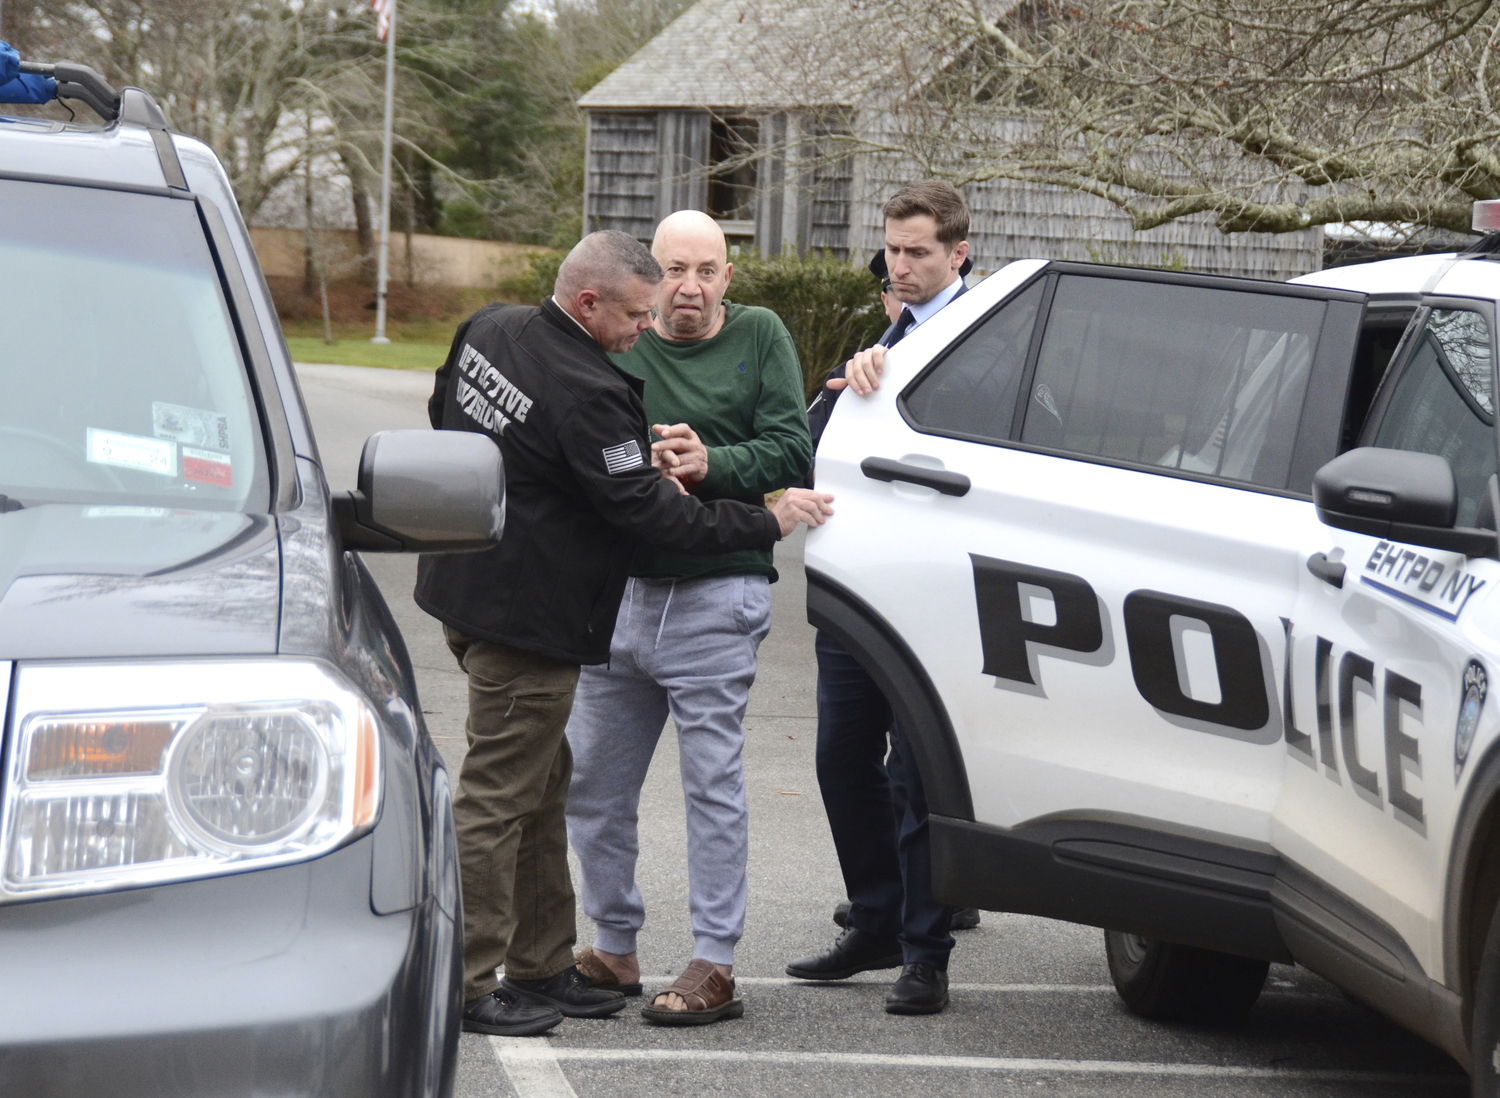 Michael Nicholoulias, 74, of East Hampton is led to his arraignment in East Hampton Town Justice Court on Tuesday afternoon.  KYRIL BROMLEY